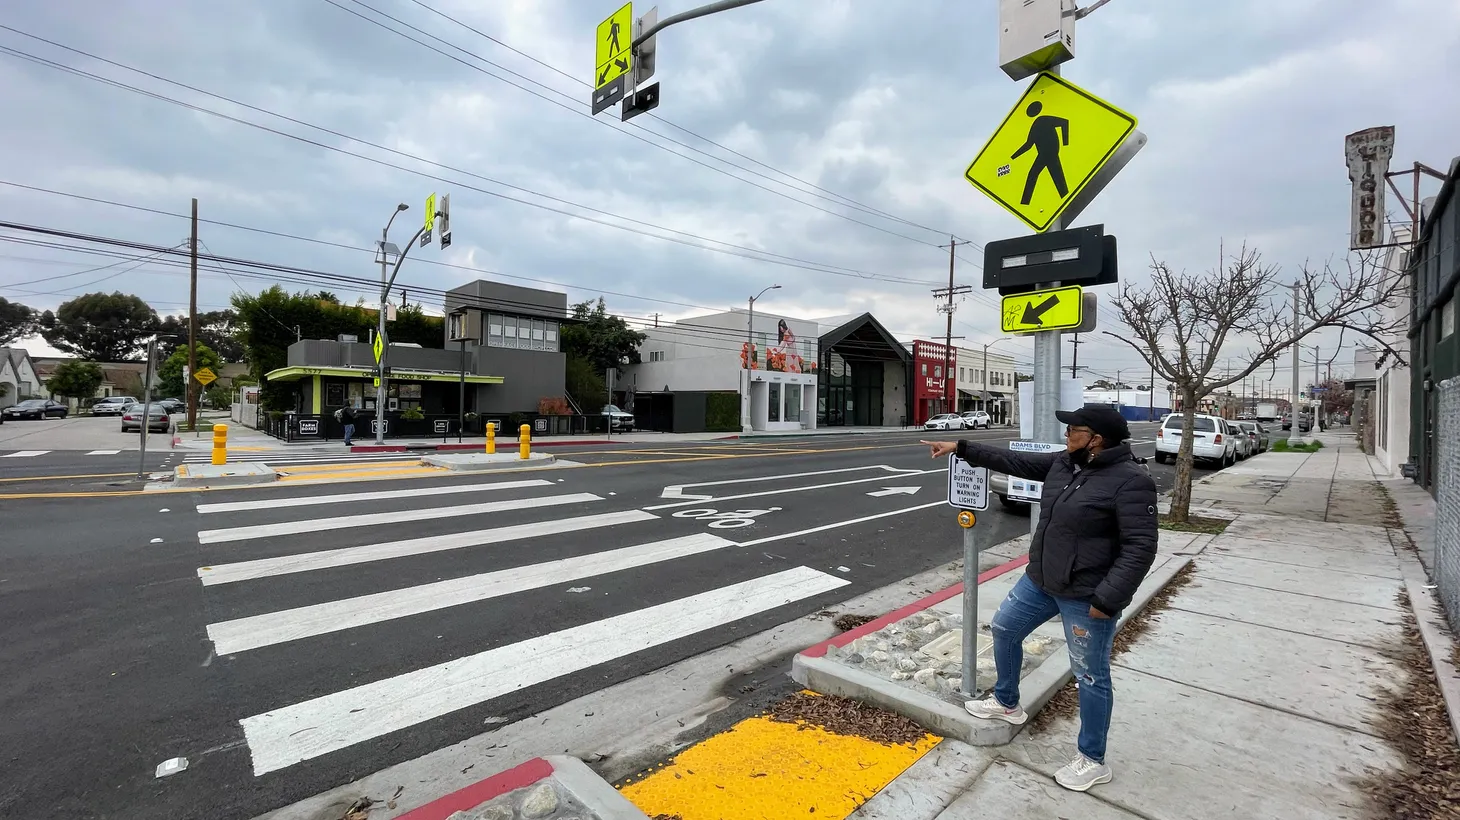 Yolanda Davis-Overstreet, a community organizer and mobility justice advocate, points to a crosswalk on West Adams Boulevard that she helped bring to the neighborhood through the City of LA’s Vision Zero.